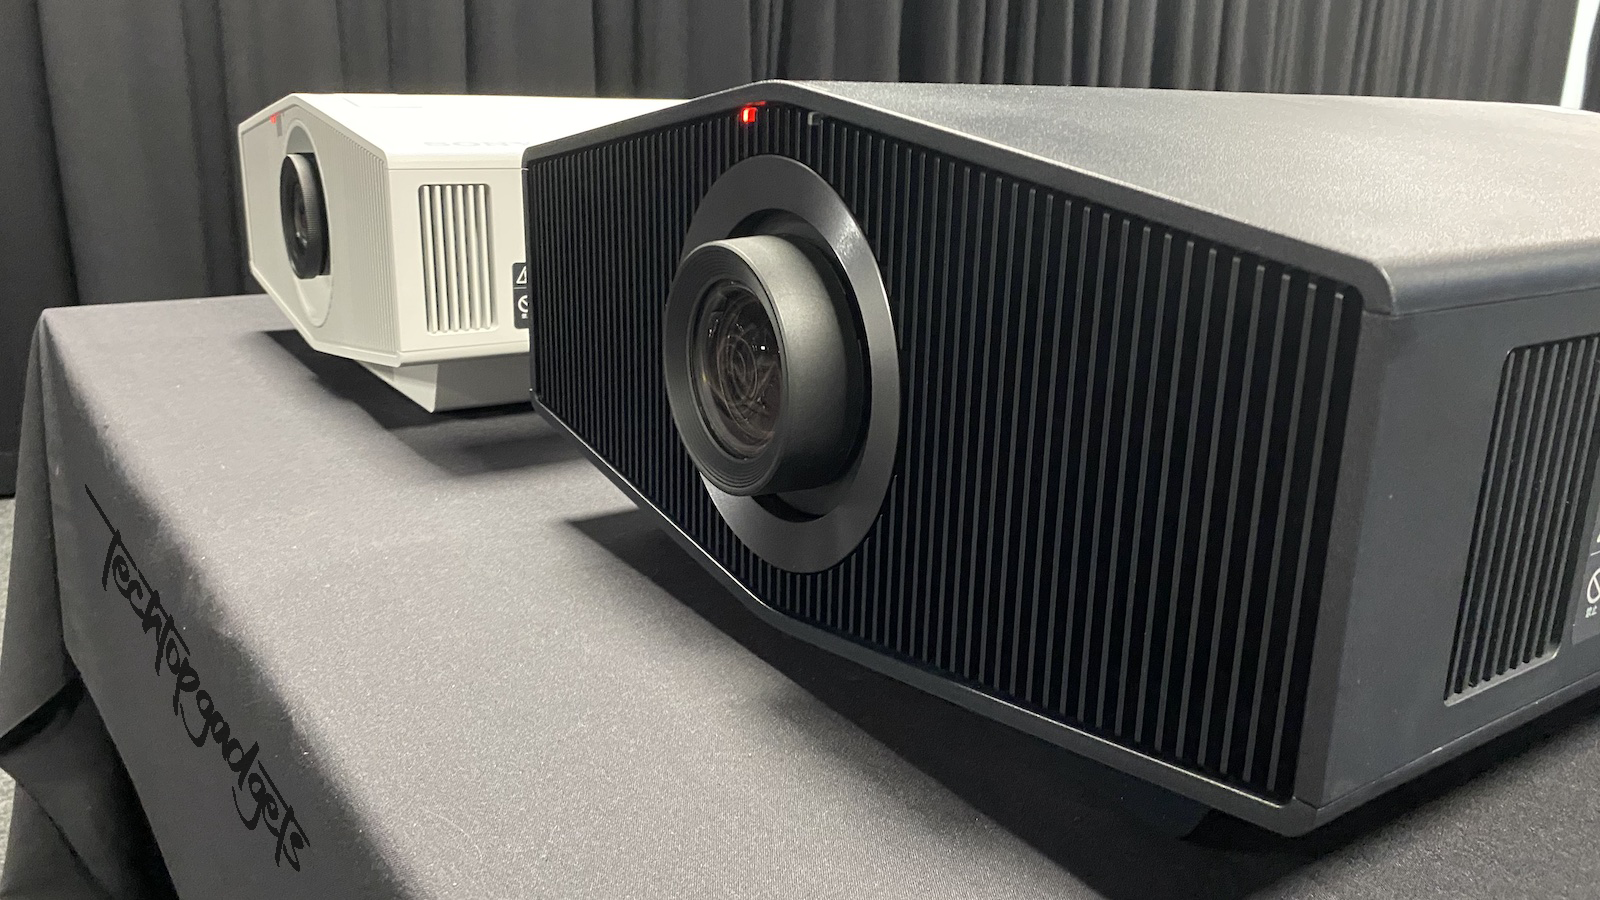 Two top-tier 4K projectors, exemplifying the best 4K projector under 2000, showcased side by side on a display table.